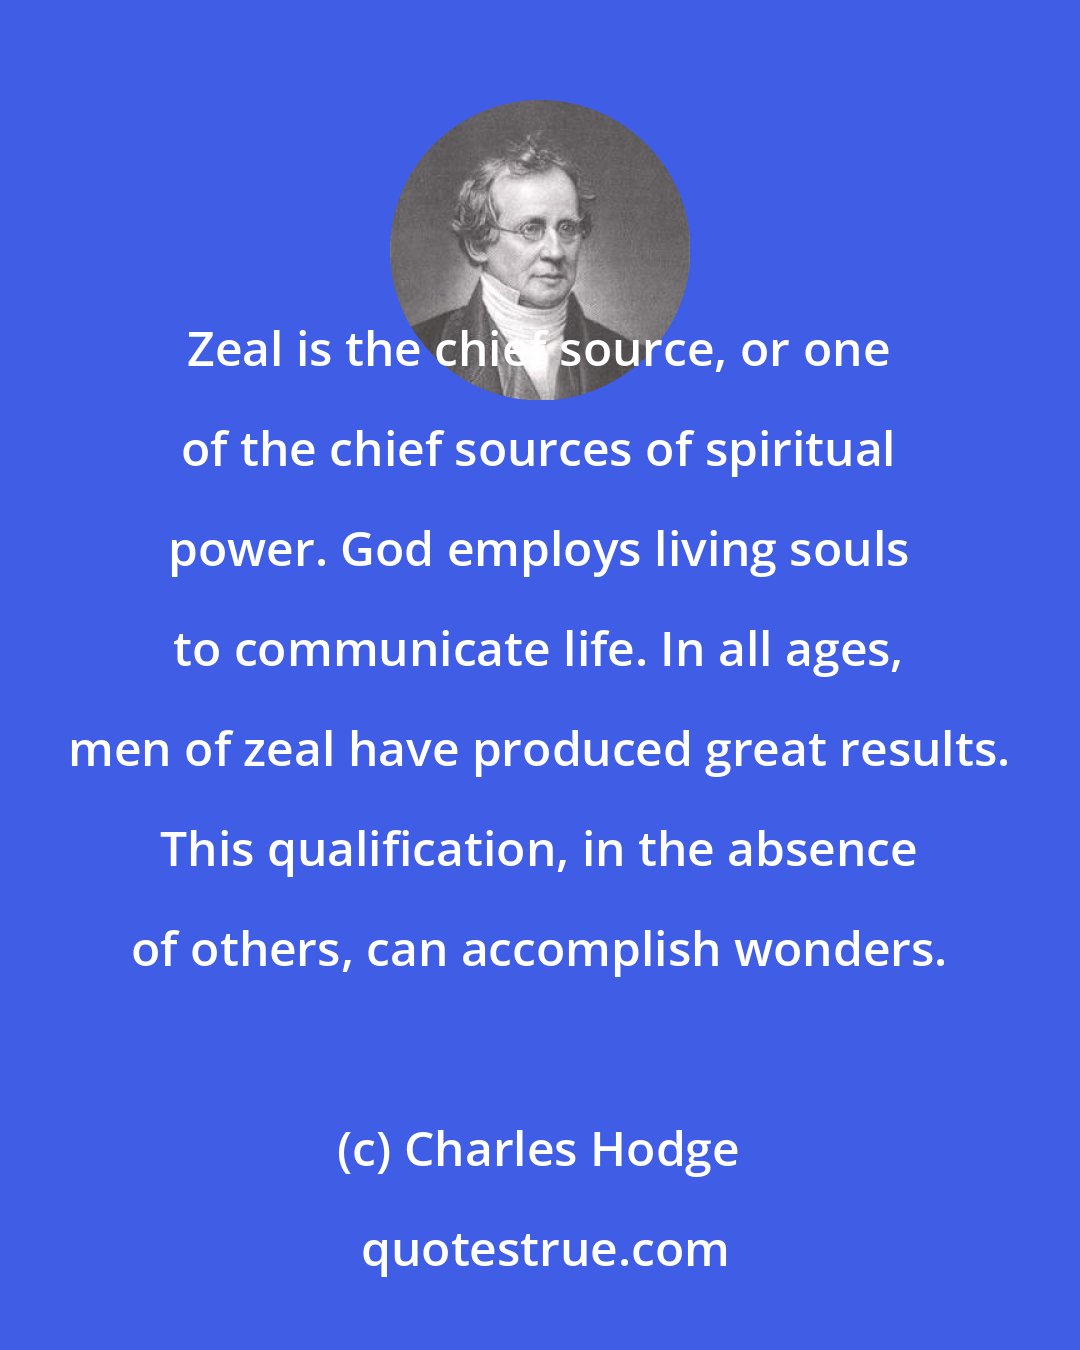 Charles Hodge: Zeal is the chief source, or one of the chief sources of spiritual power. God employs living souls to communicate life. In all ages, men of zeal have produced great results. This qualification, in the absence of others, can accomplish wonders.